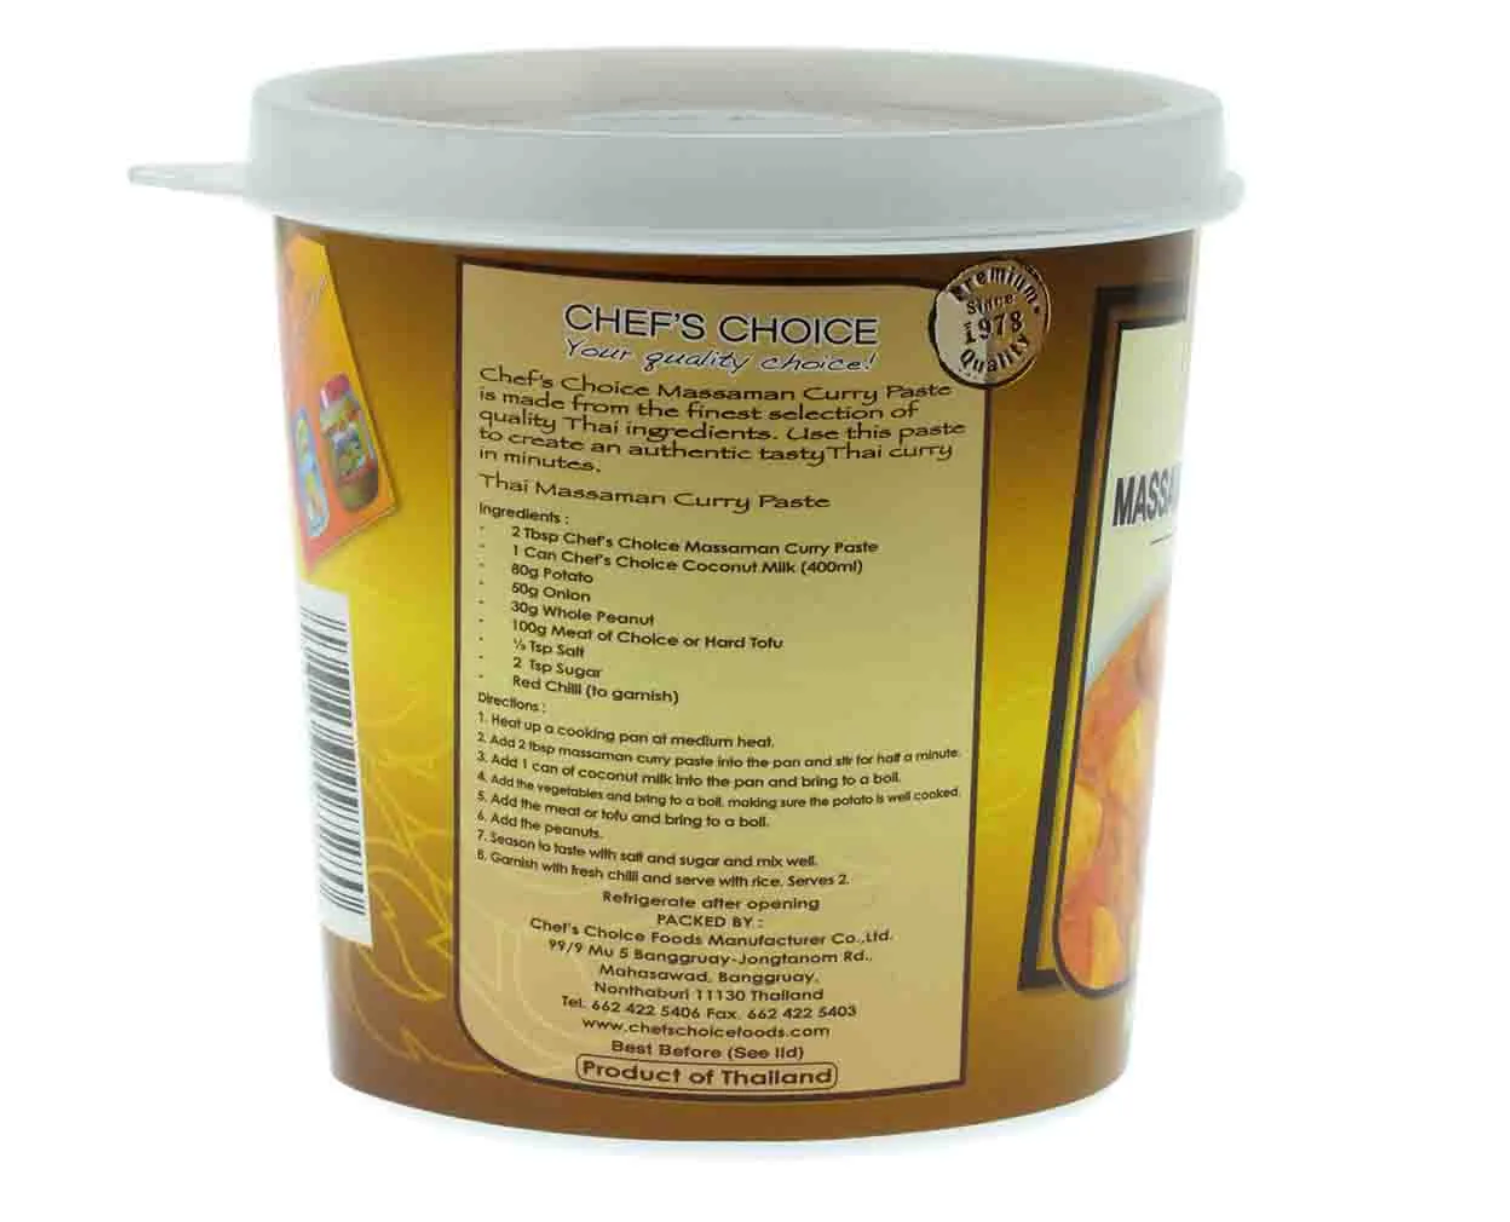 Chef's Choice - Mussaman Curry Paste 400g - Pantree